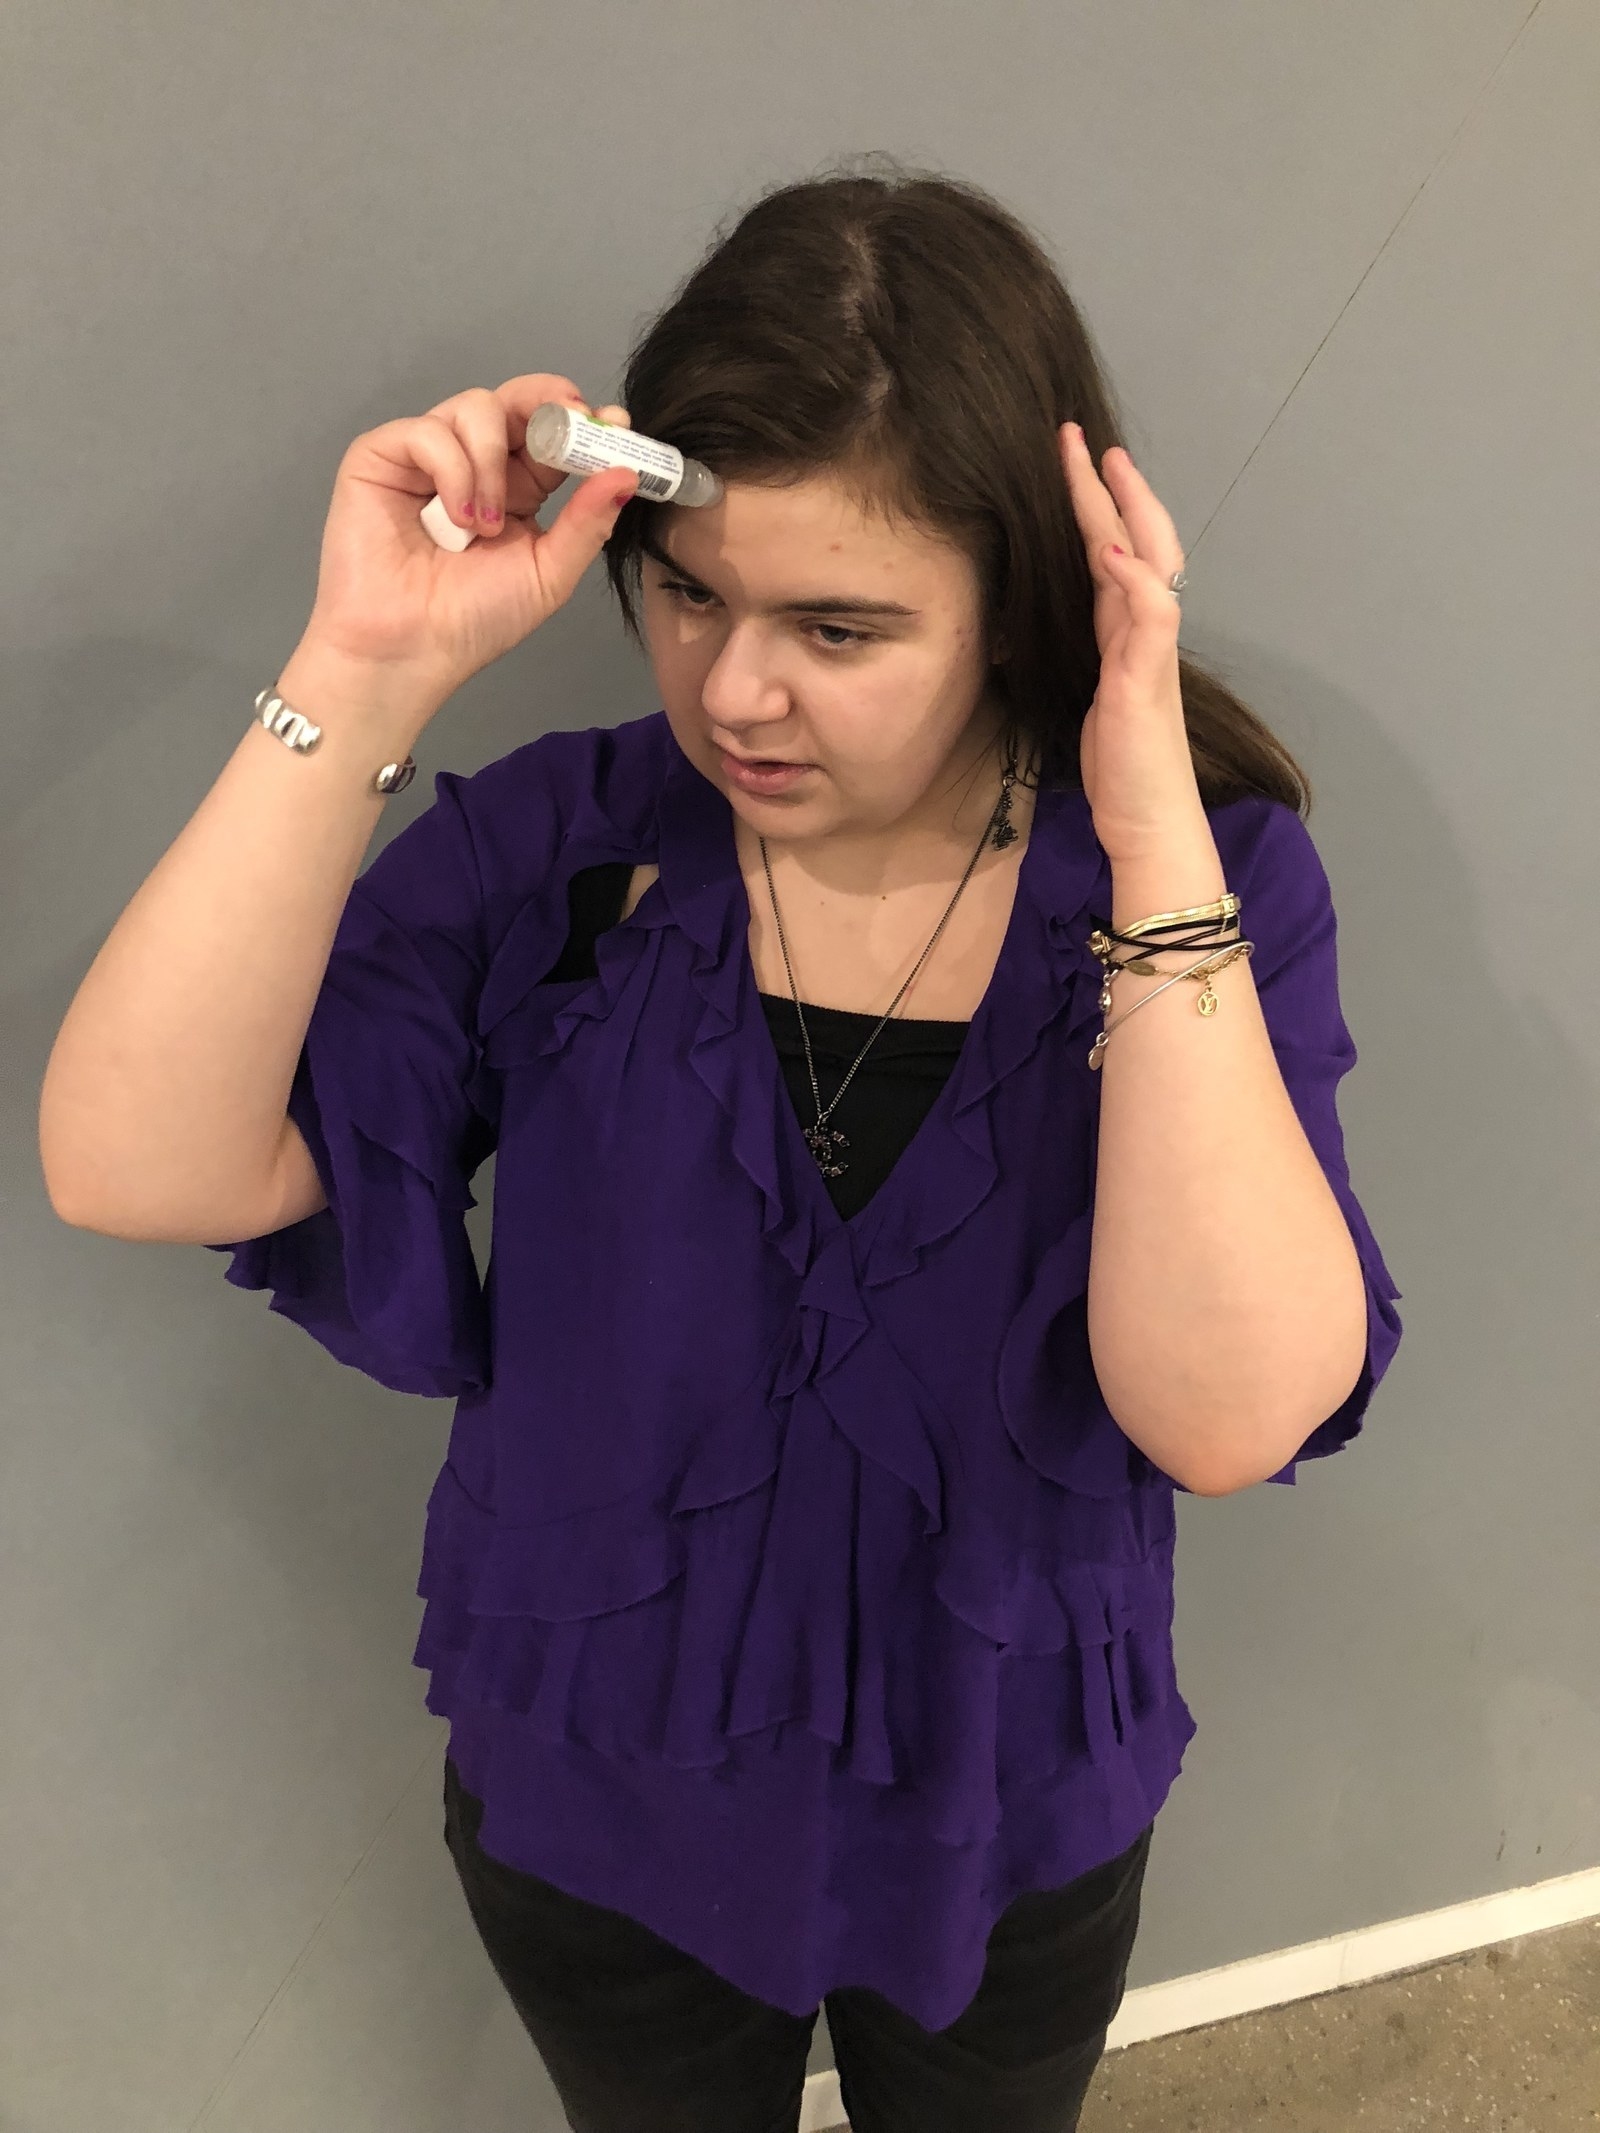 BuzzFeed writer holding the stick to her forehead